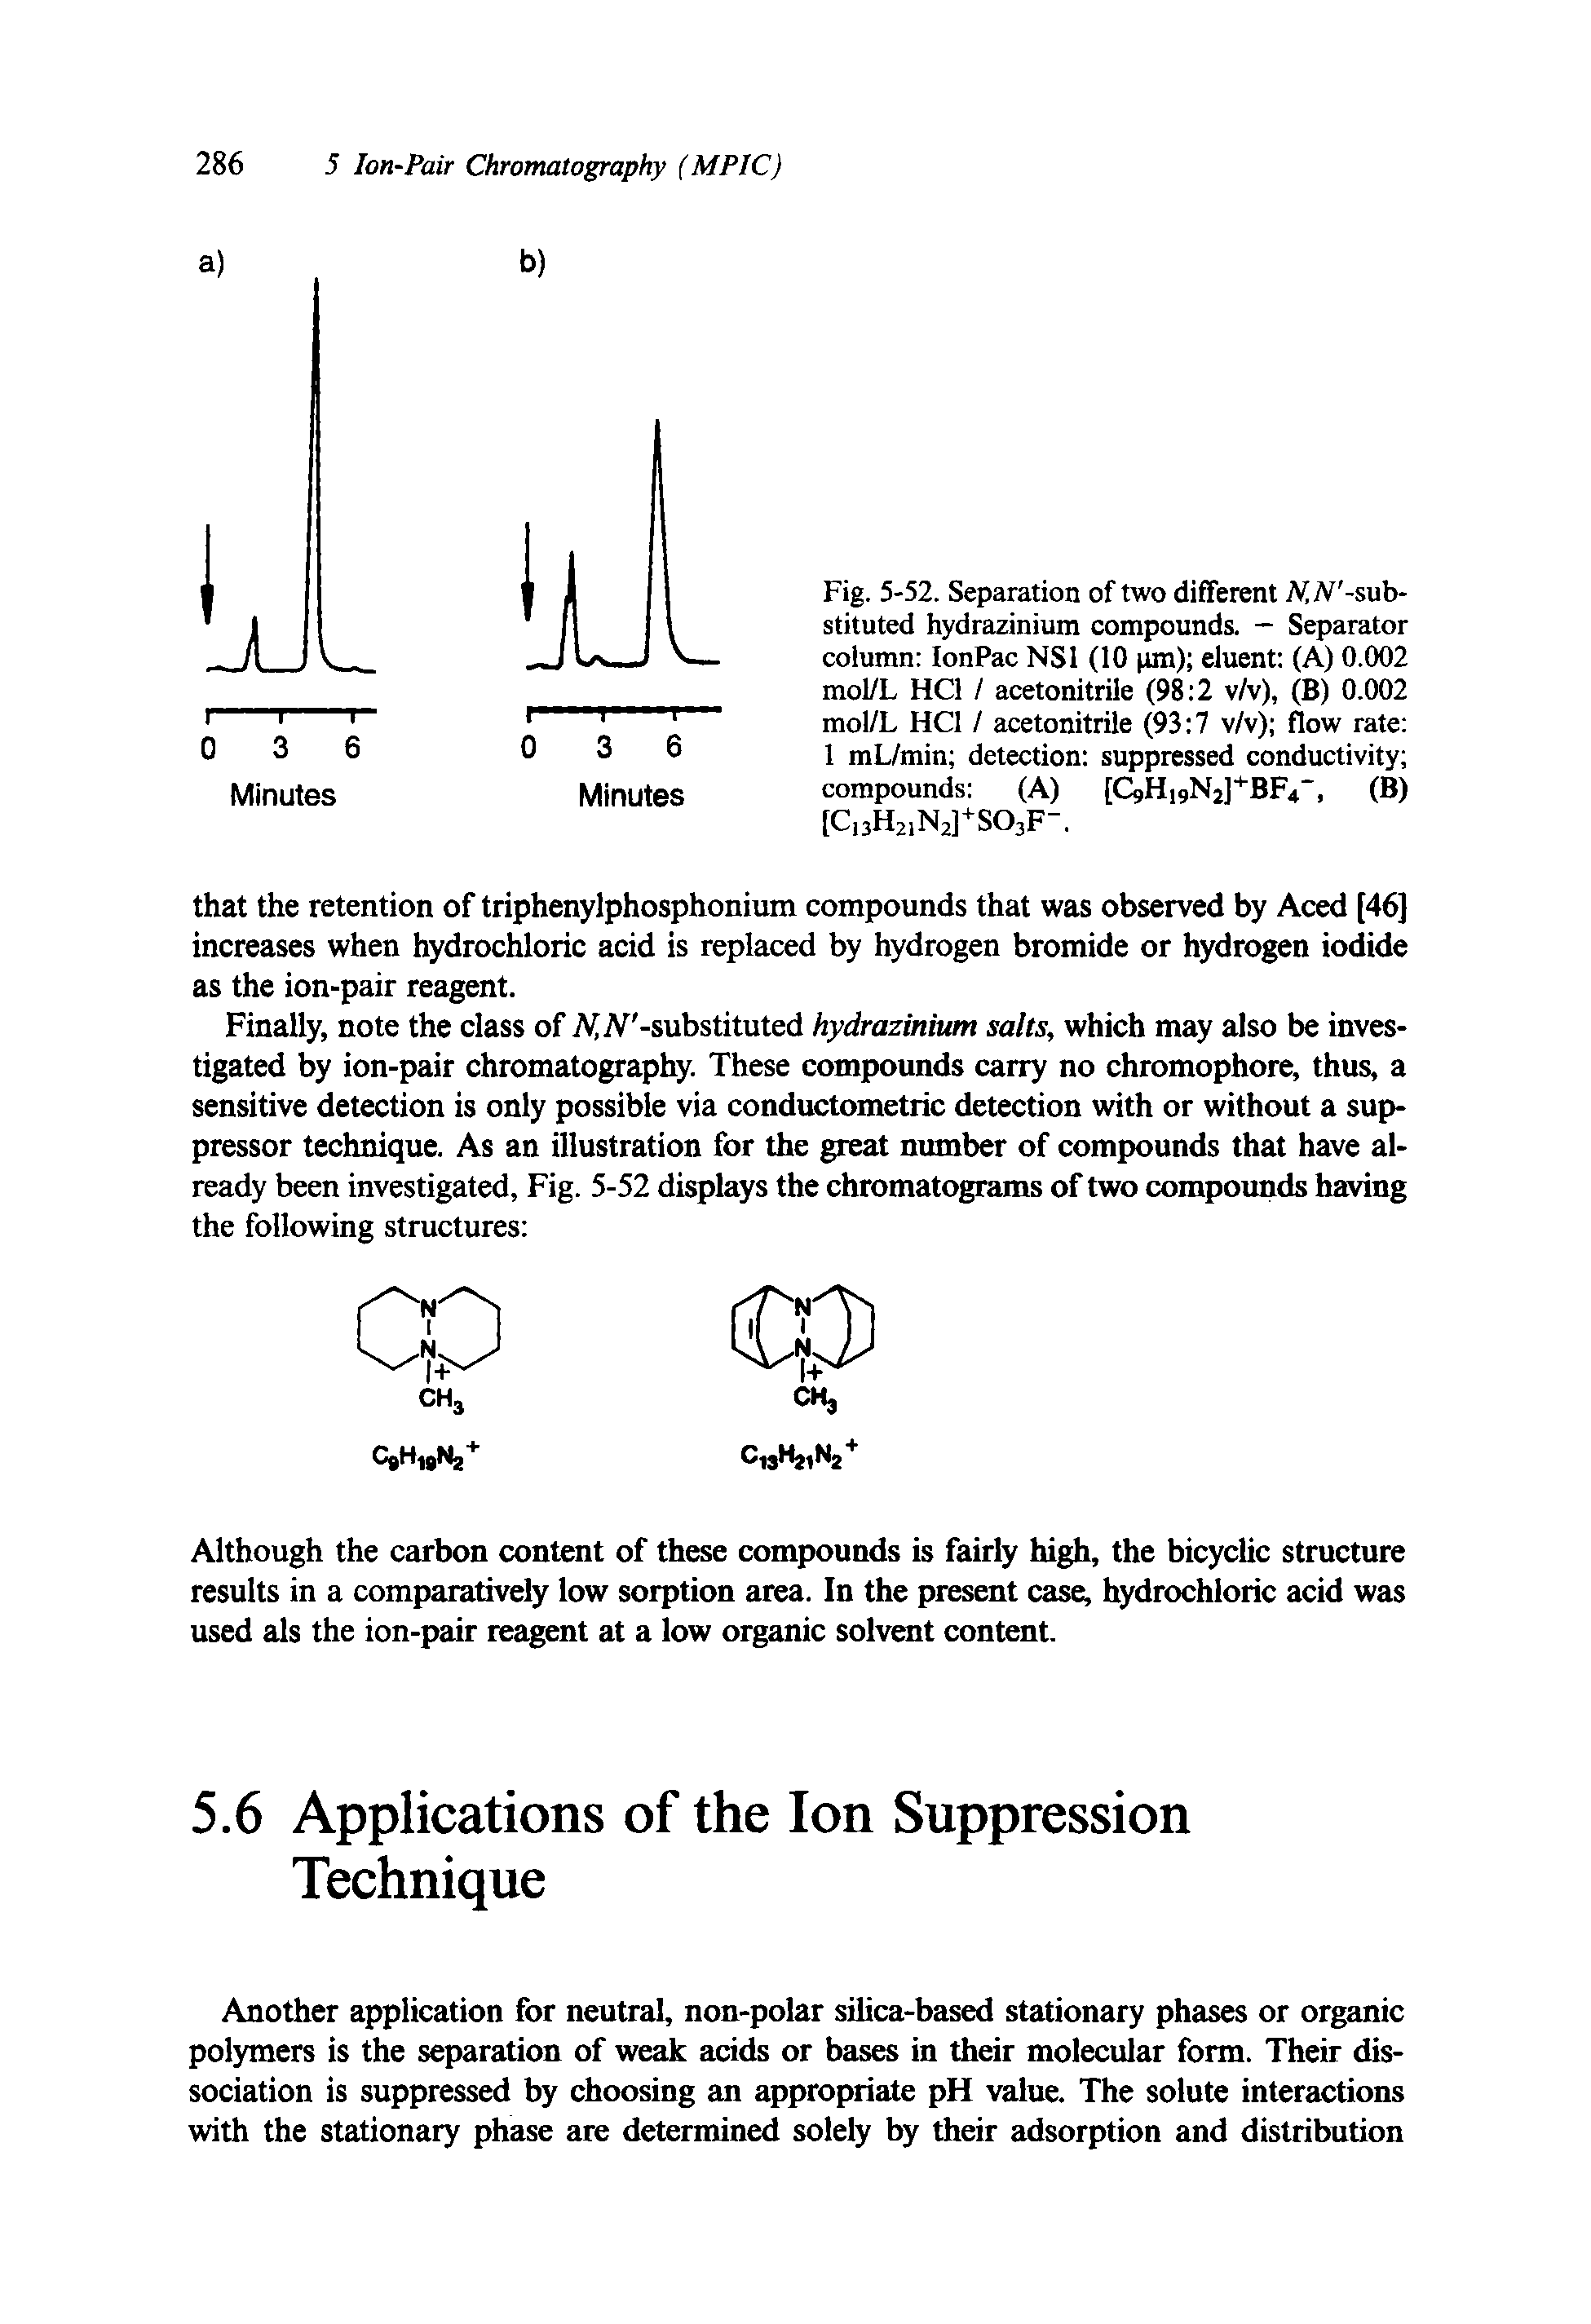 Fig. 5-52. Separation of two different -substituted hydrazinium compounds. — Separator column IonPac NS1 (10 pm) eluent (A) 0.002 mol/L HC1 / acetonitrile (98 2 v/v), (B) 0.002 mol/L HC1 / acetonitrile (93 7 v/v) flow rate 1 mL/min detection suppressed conductivity compounds (A) [C9H19N2]+BF4, (B)...